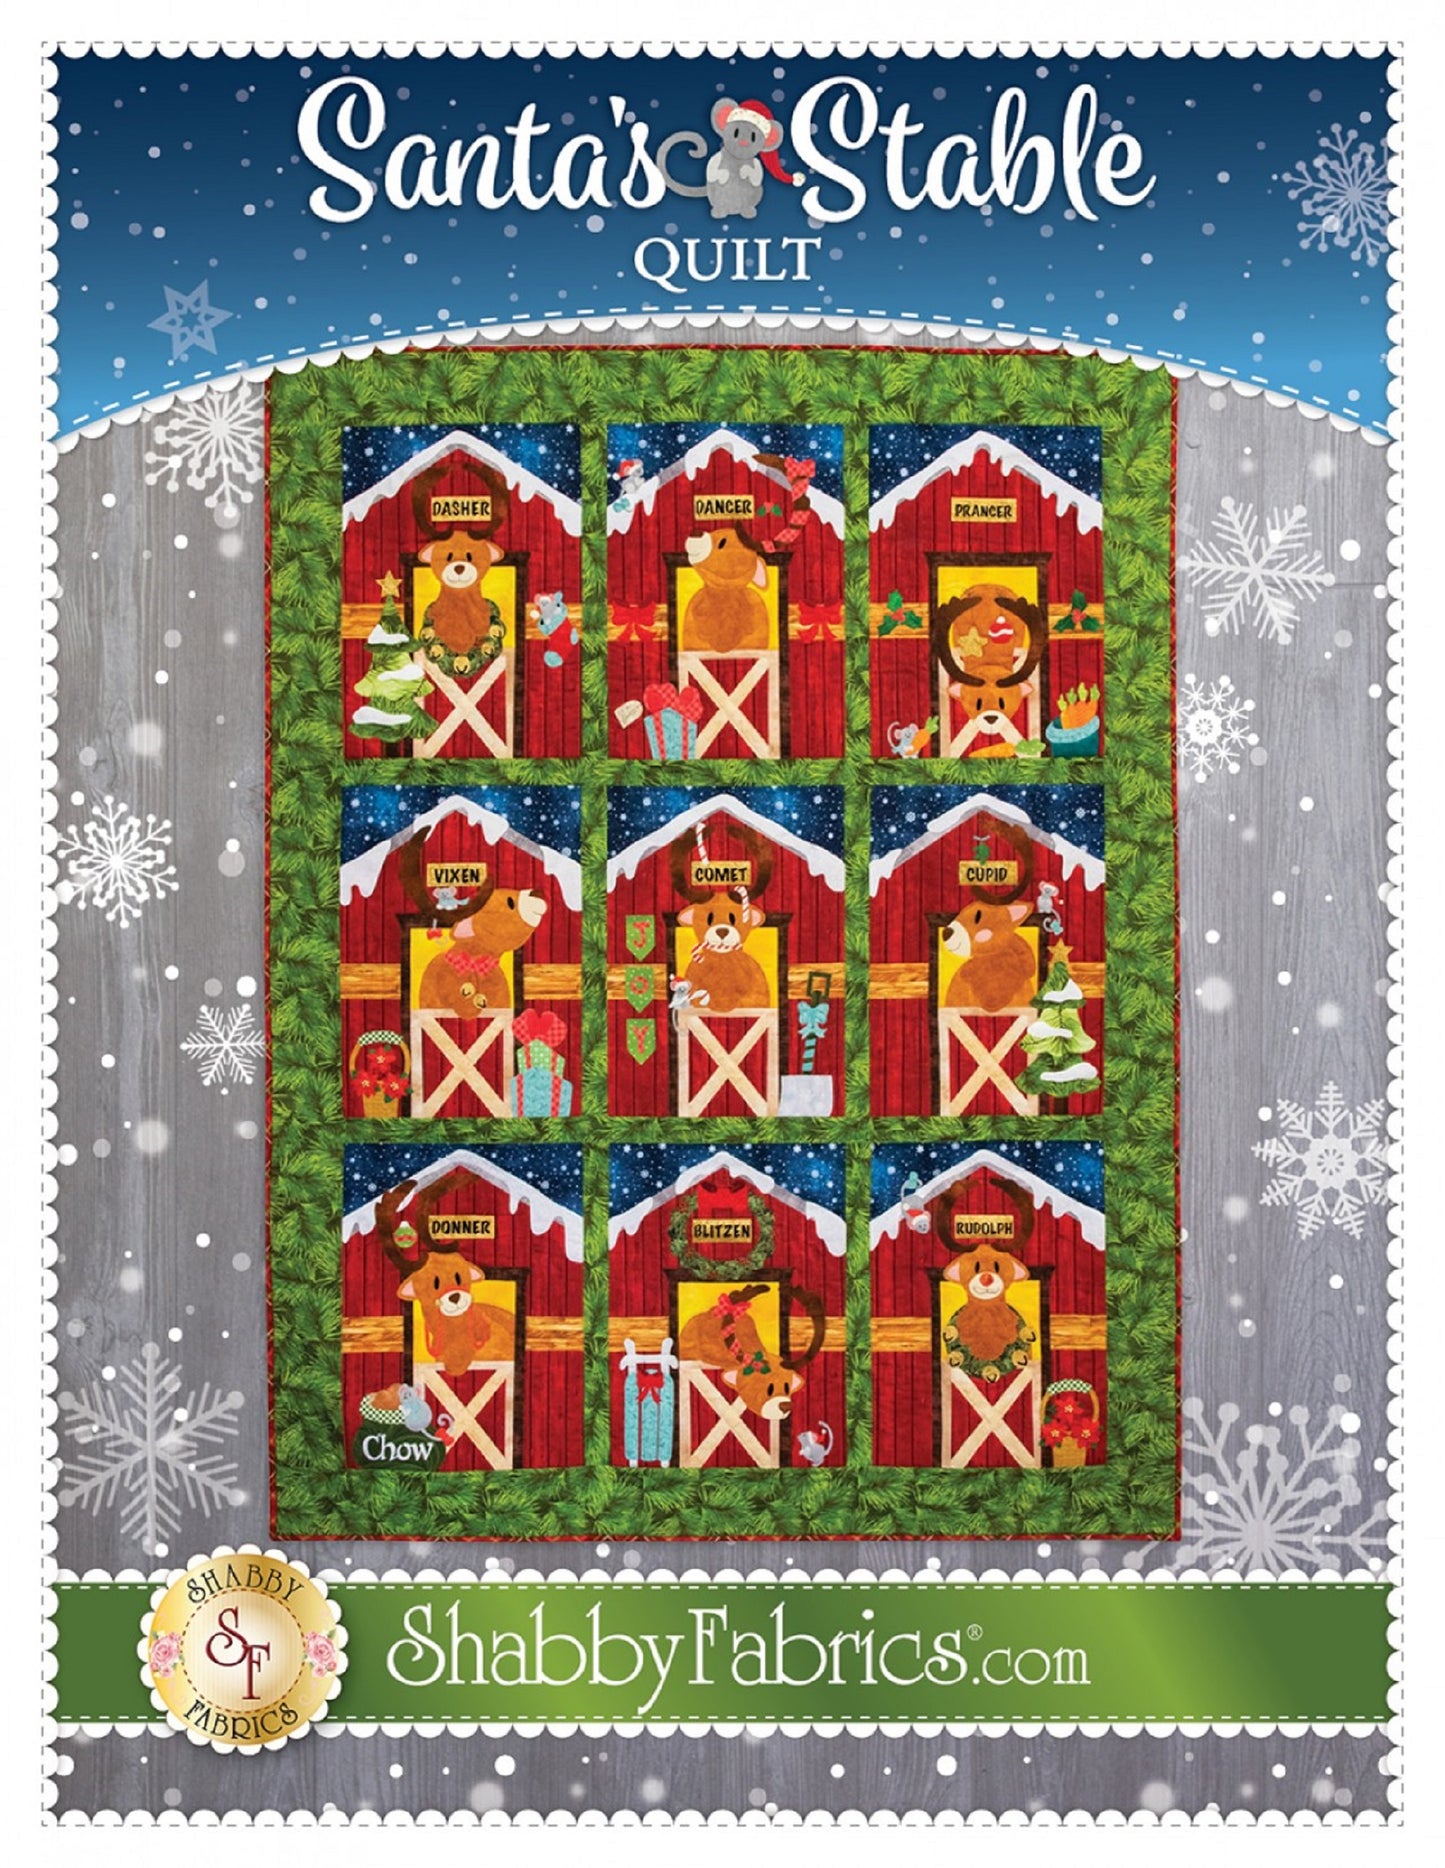 Santa's Stable Quilt Pattern by Shabby Fabrics